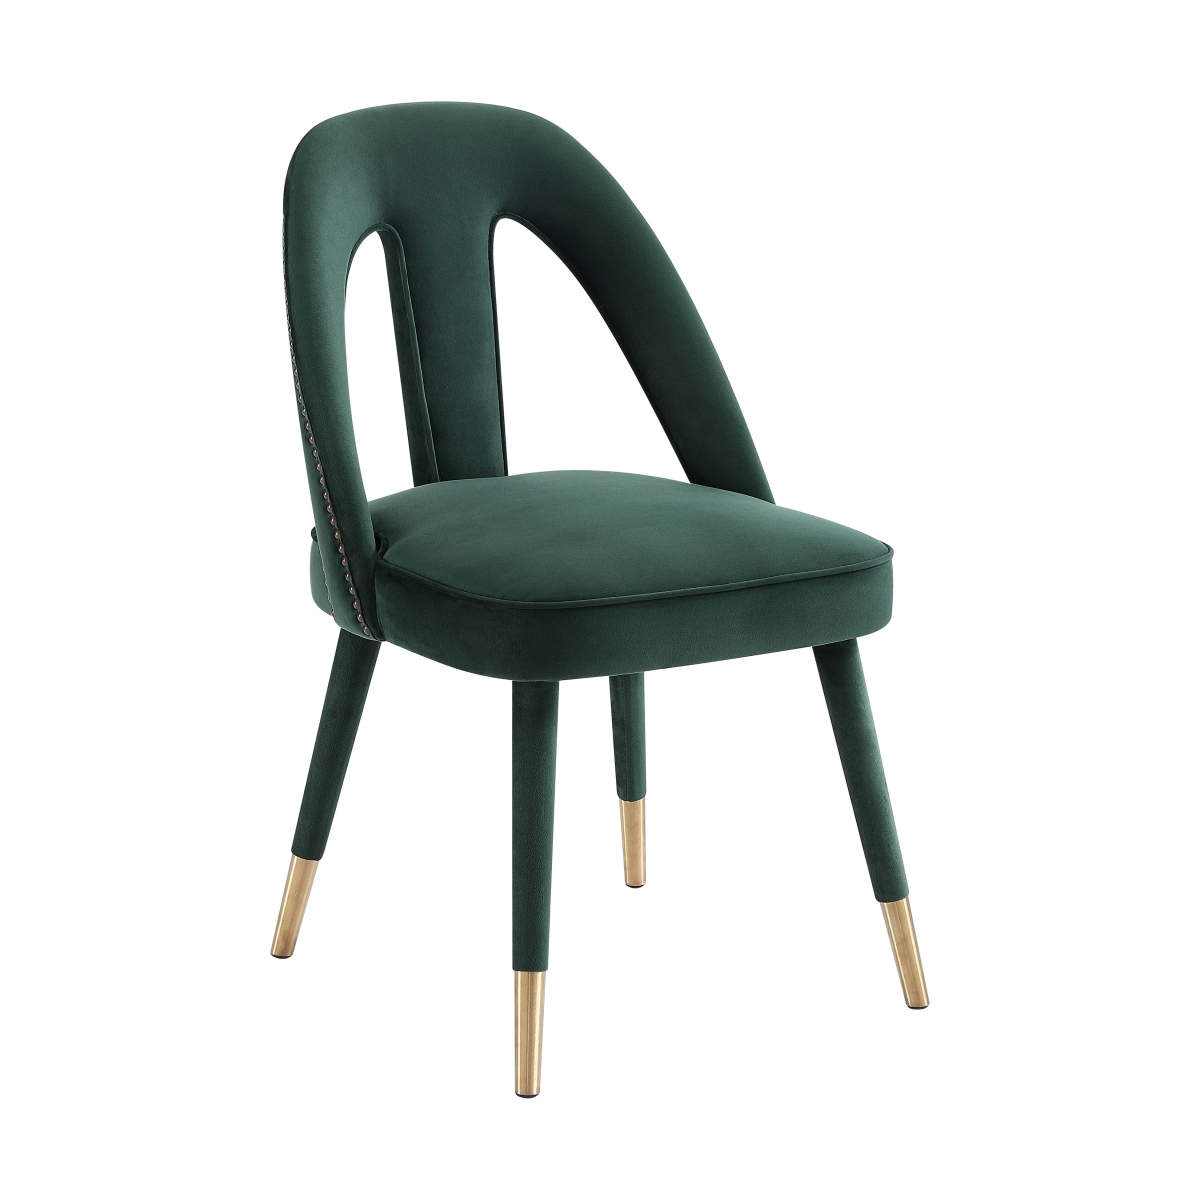 TOV-D6364 Petra Forest Velvet Side Chair, Green - 34.3 x 20.5 x 24 in -  Tov Furniture